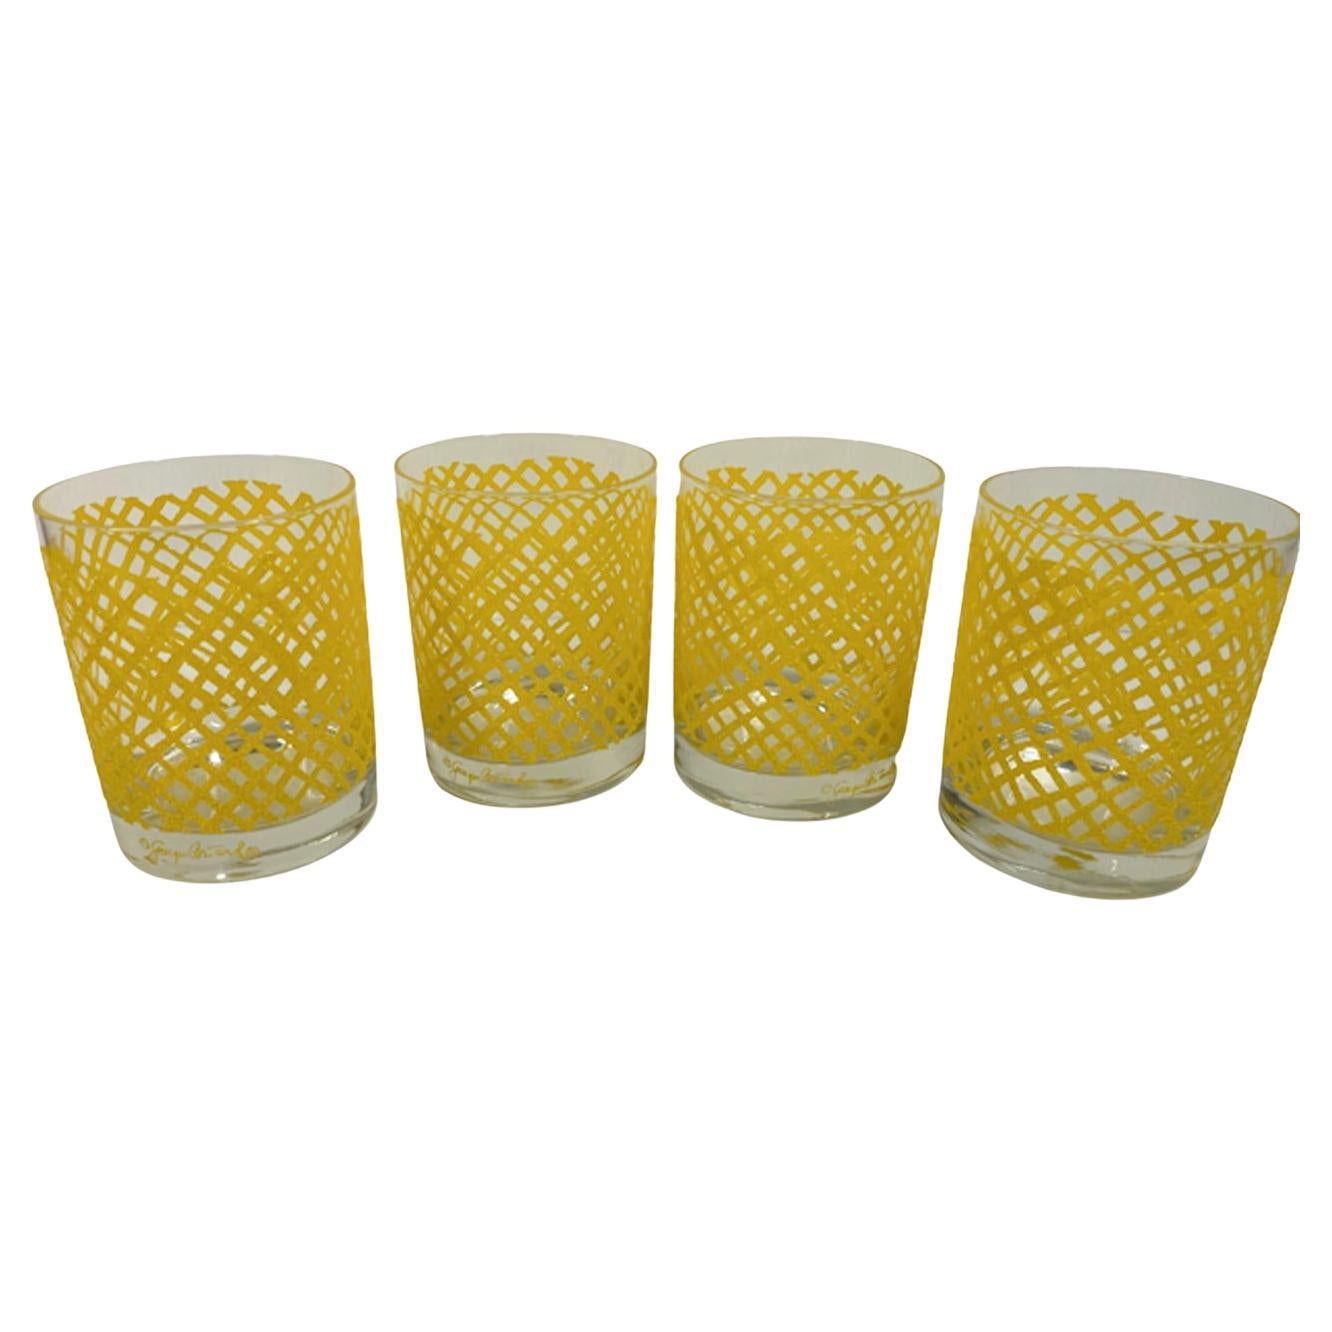 Set of 4 Vintage Georges Briard Rocks Glasses with a Raised Yellow Net Pattern